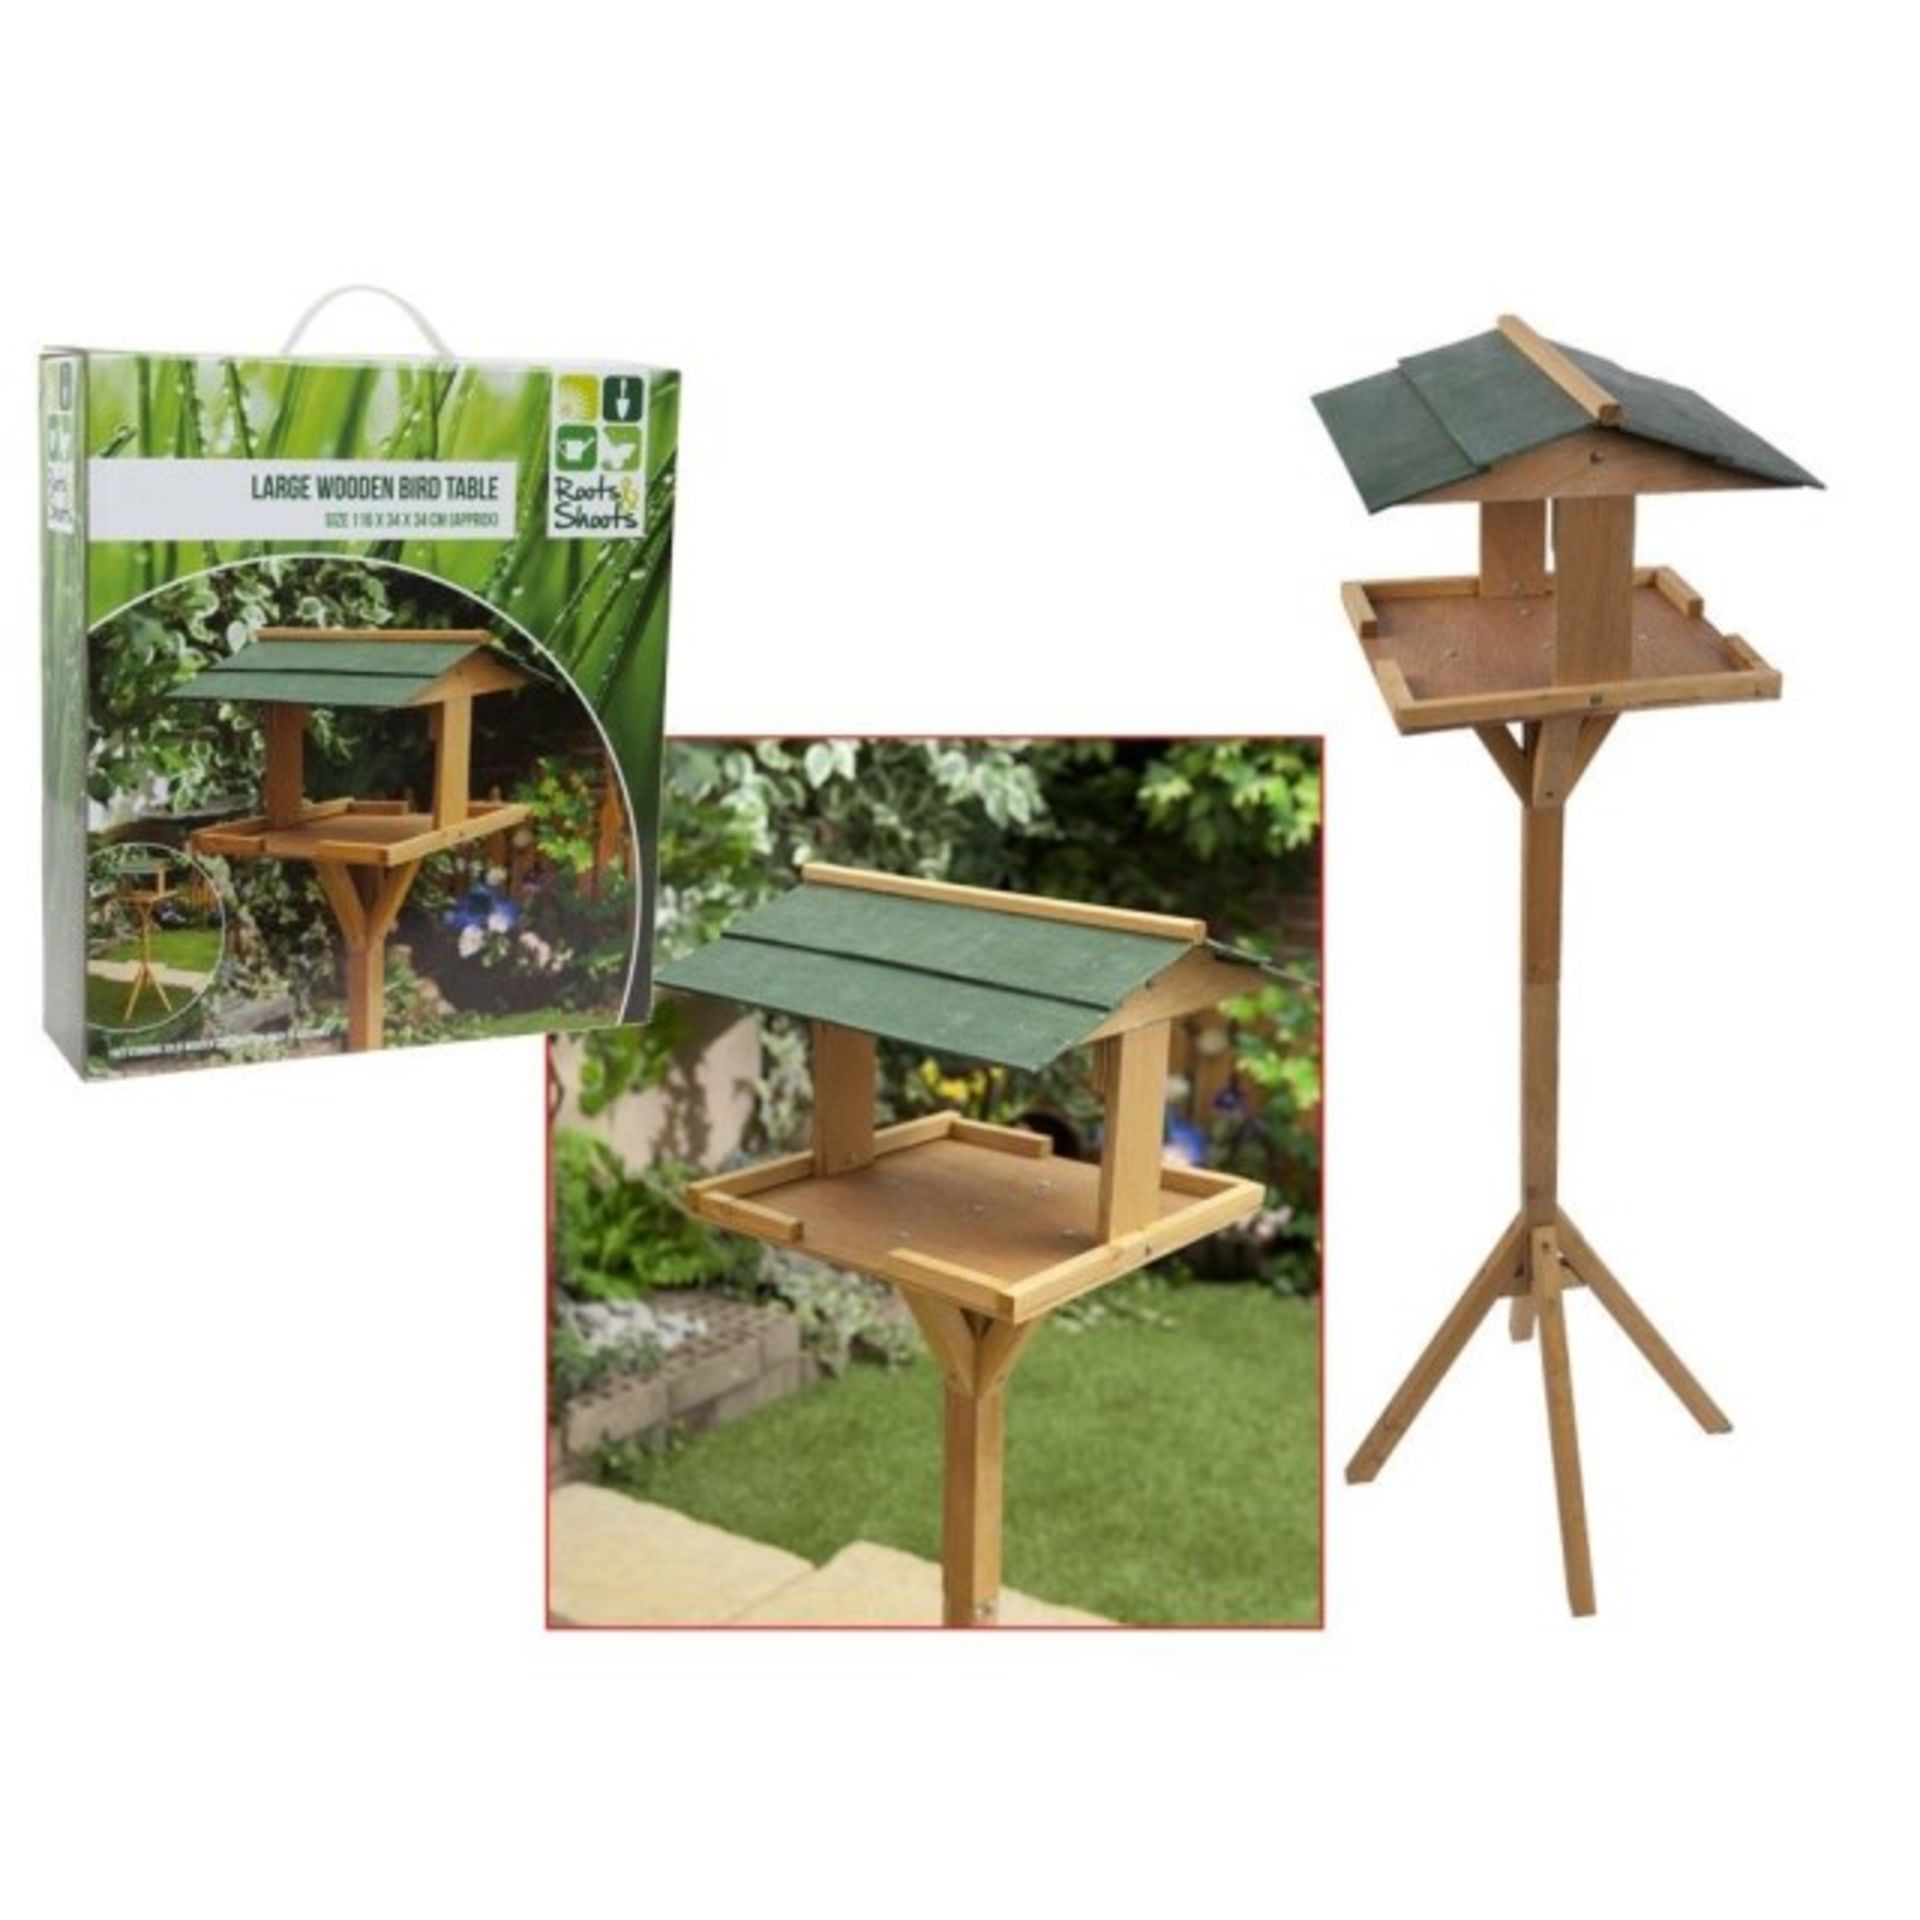 V Brand New Large Wooden Bird Table (116 x 34 x 34 cm Approx) - Image 2 of 2